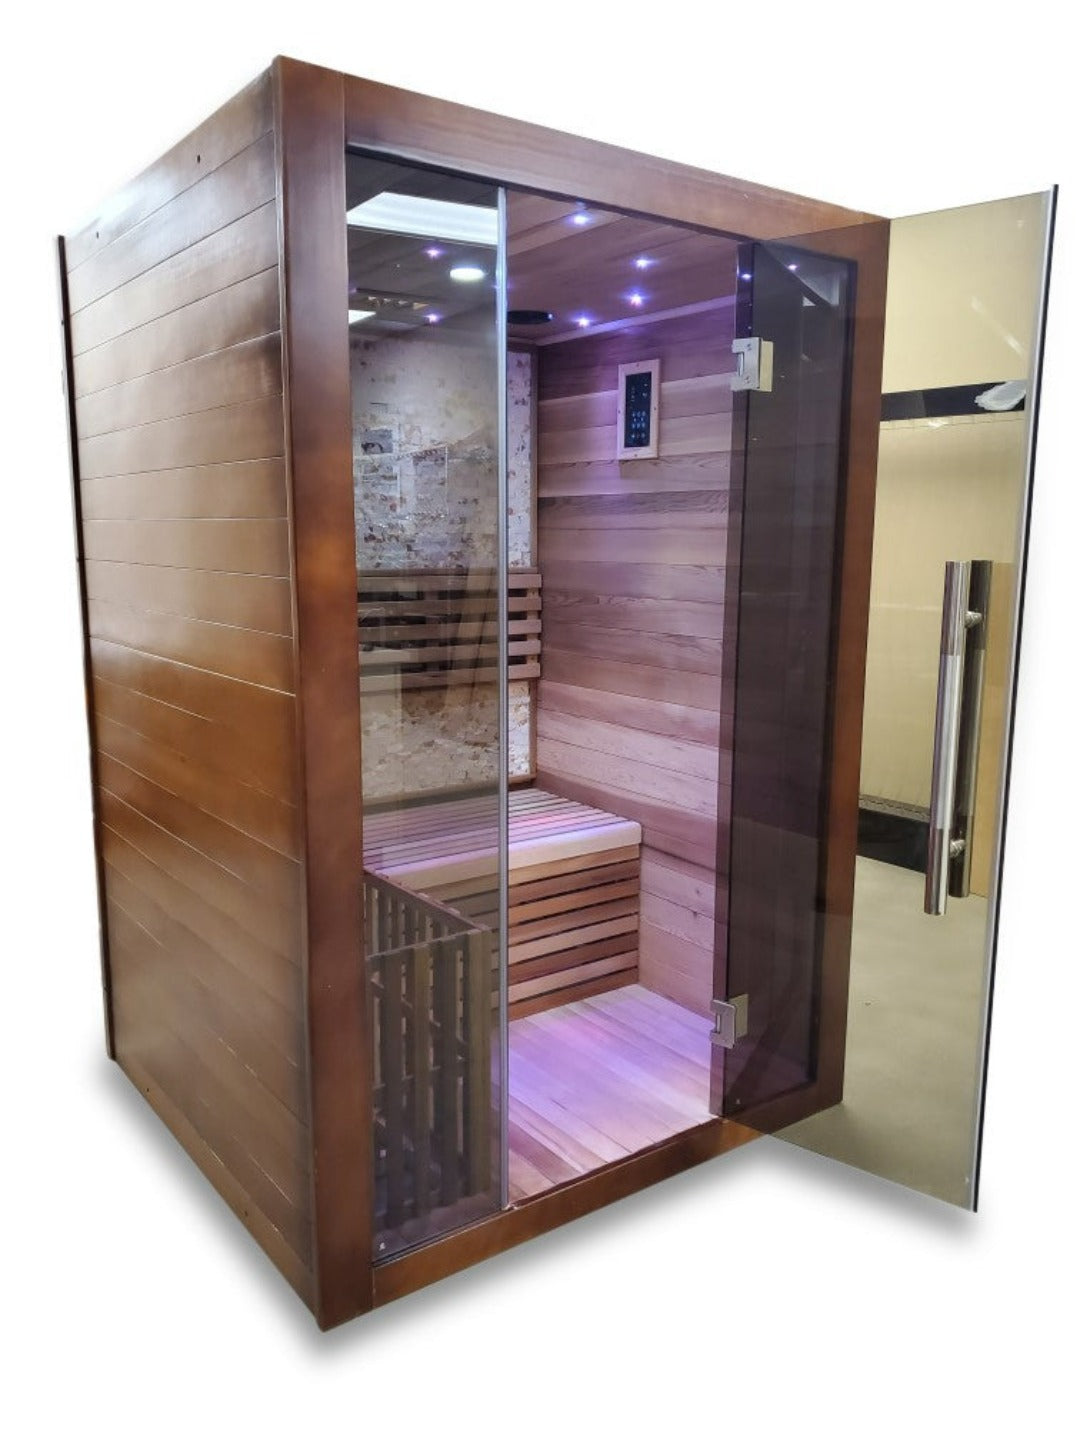 Canadian Red Cedar Wood Indoor Traditional Wet / Dry Swedish Steam Sauna SPA Harvia 6KW Heater Upgrade for 1 - 2 Persons, sde view